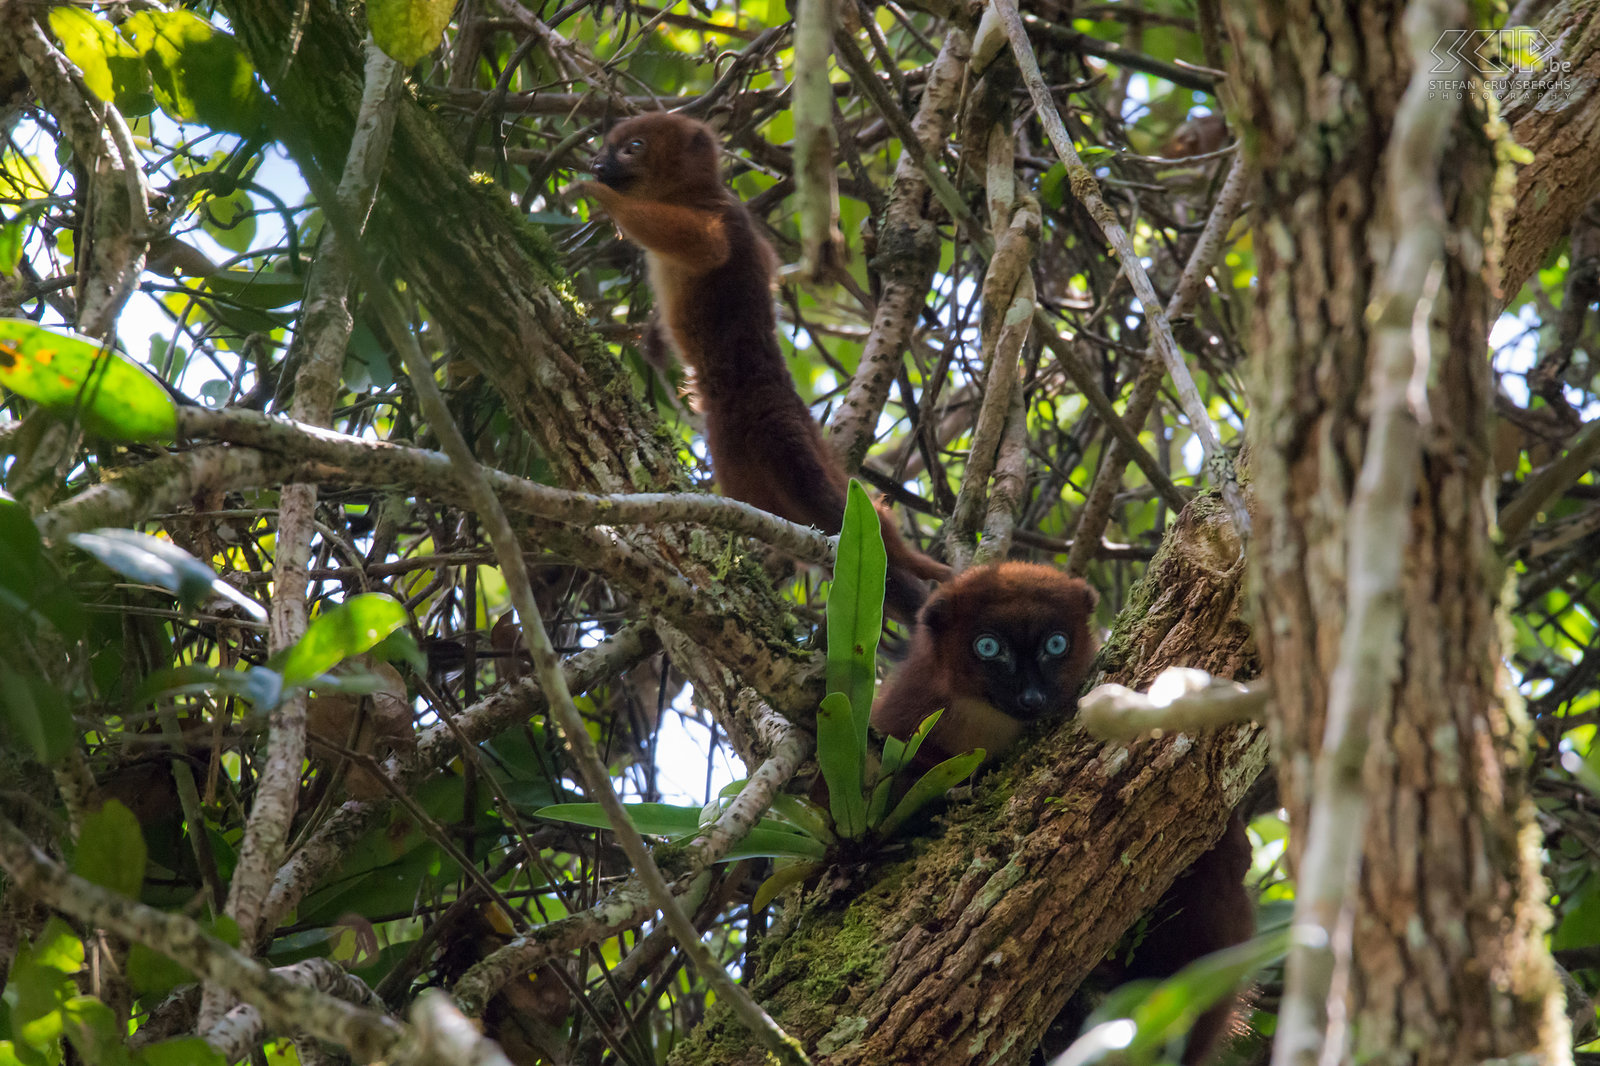 Mantadia - Red-bellied lemurs Adult and juvenile red-bellied lemurs (Eulemur rubriventer) in Mantadia. The red-bellied lemur is a medium sized lemur with chestnut brown coat that is endemic to the eastern Madagascan rainforests. Stefan Cruysberghs